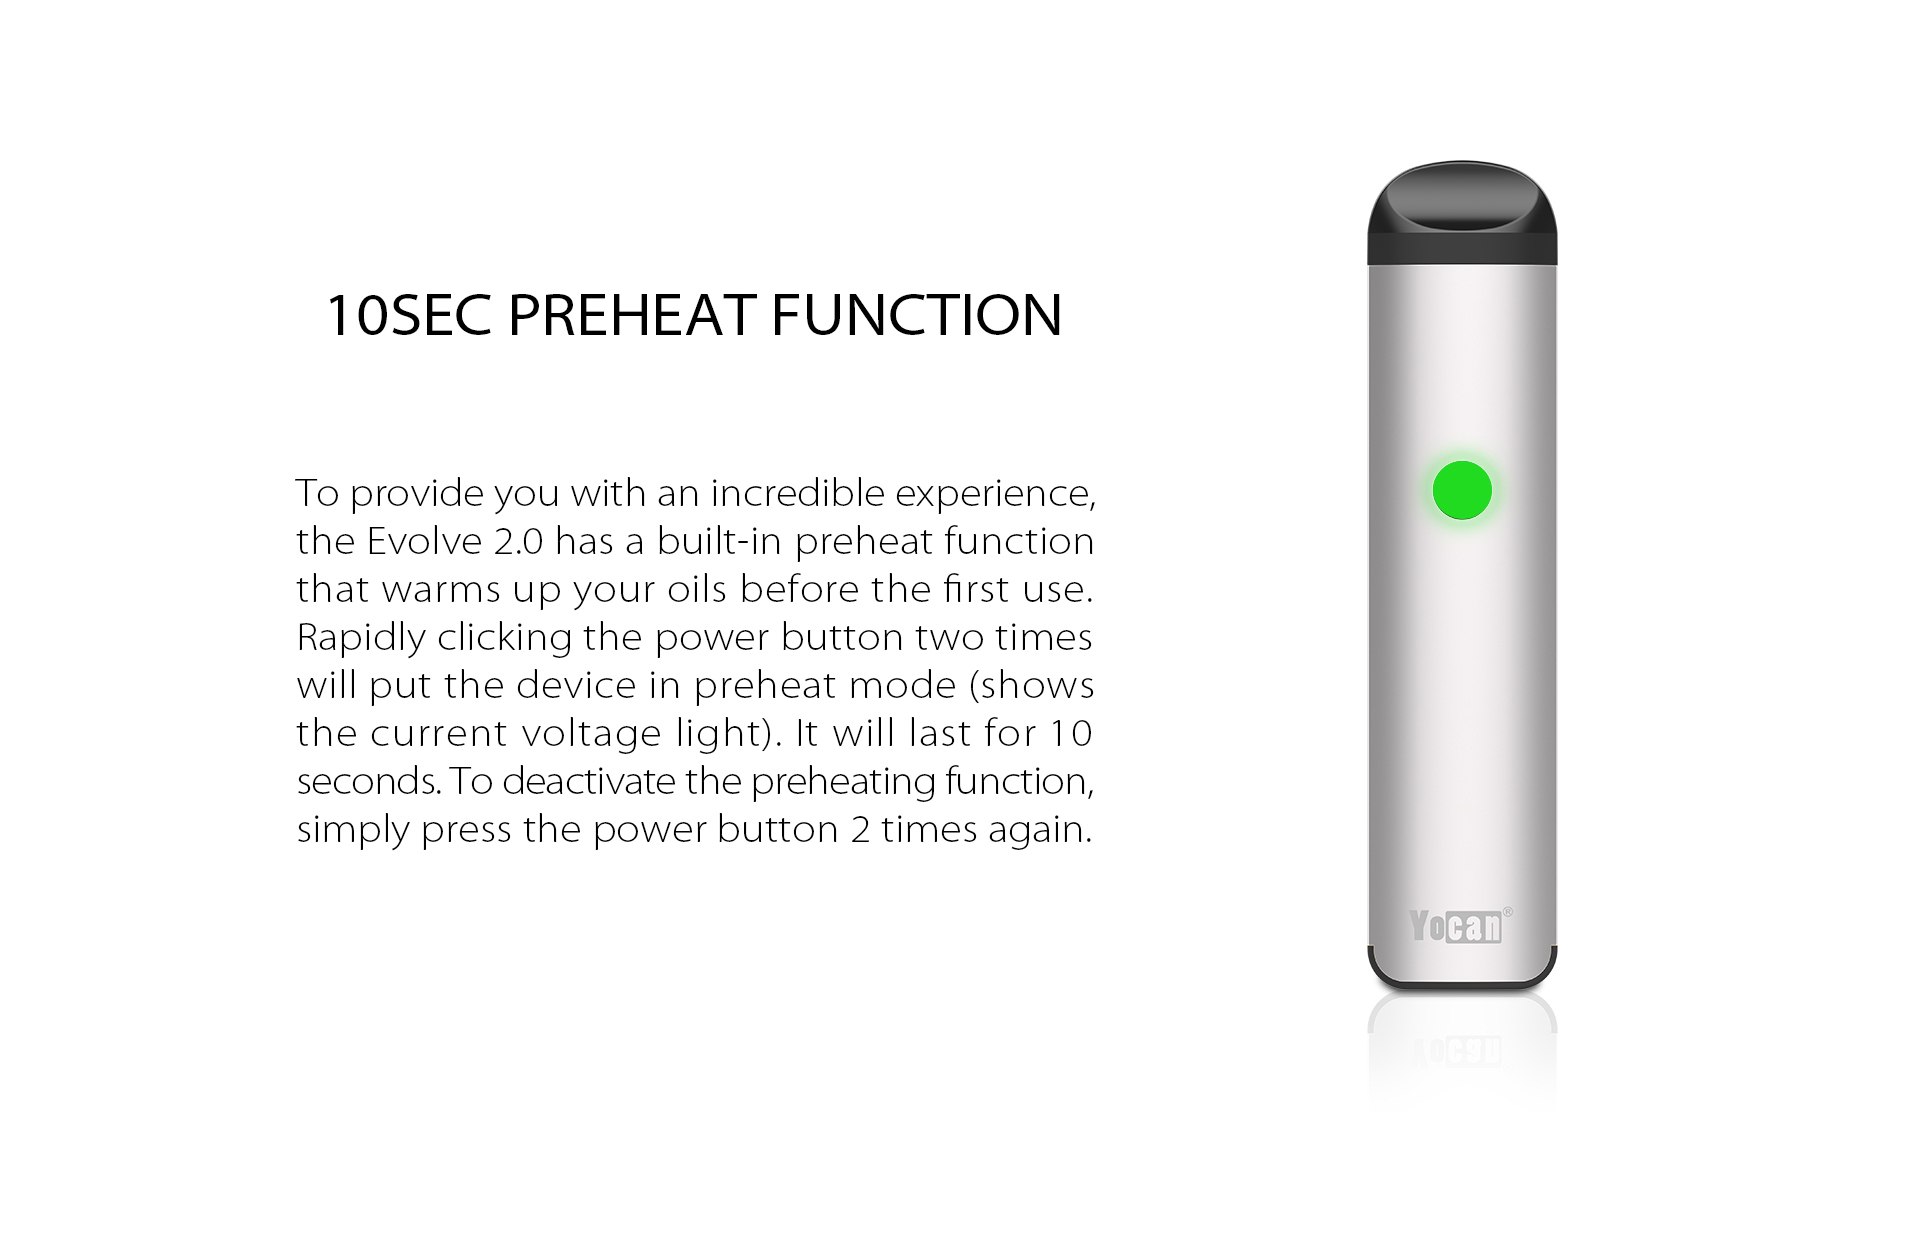 Yocan Evolve 2.0 features 10SEC Preheat Function